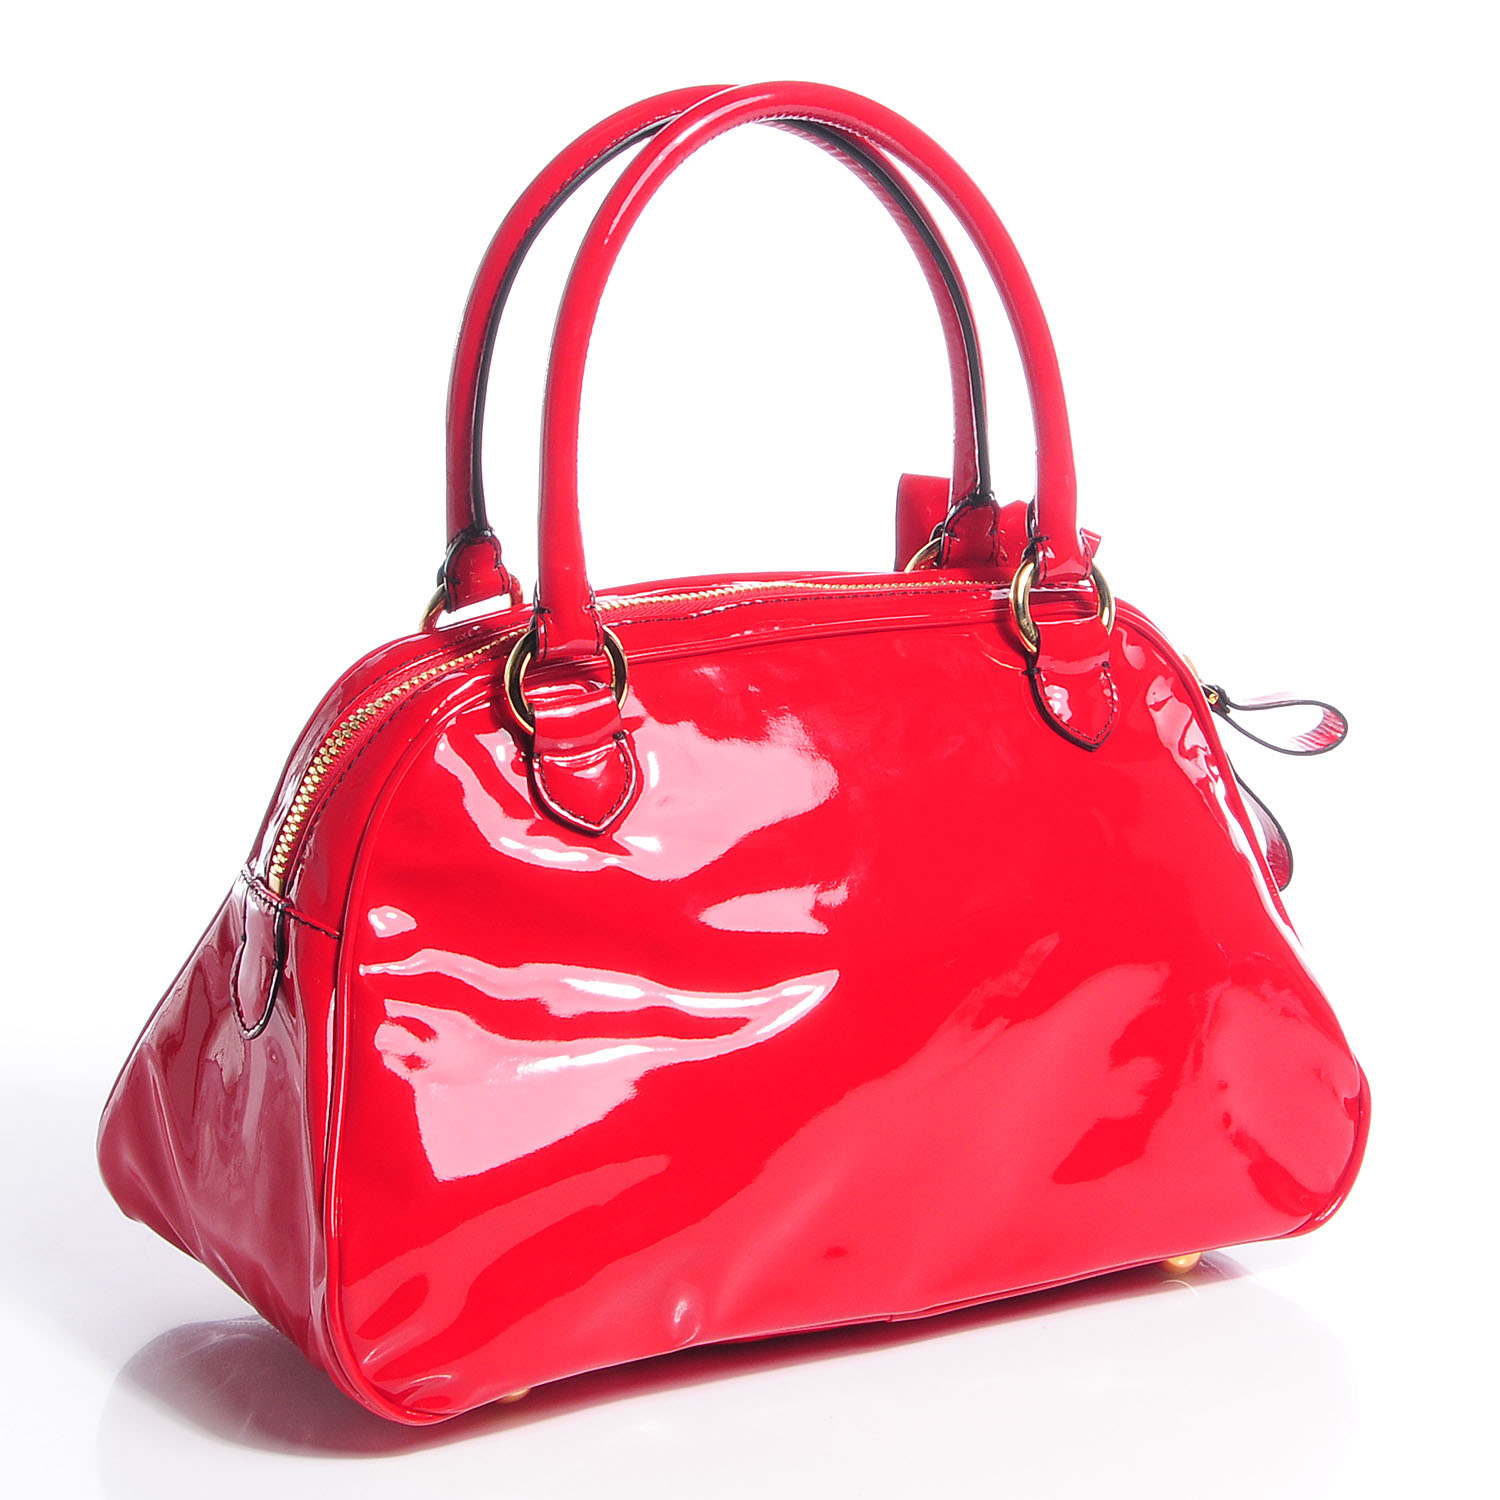 VALENTINO Patent Lacca Leather Bow Bowling Bag Red 97401